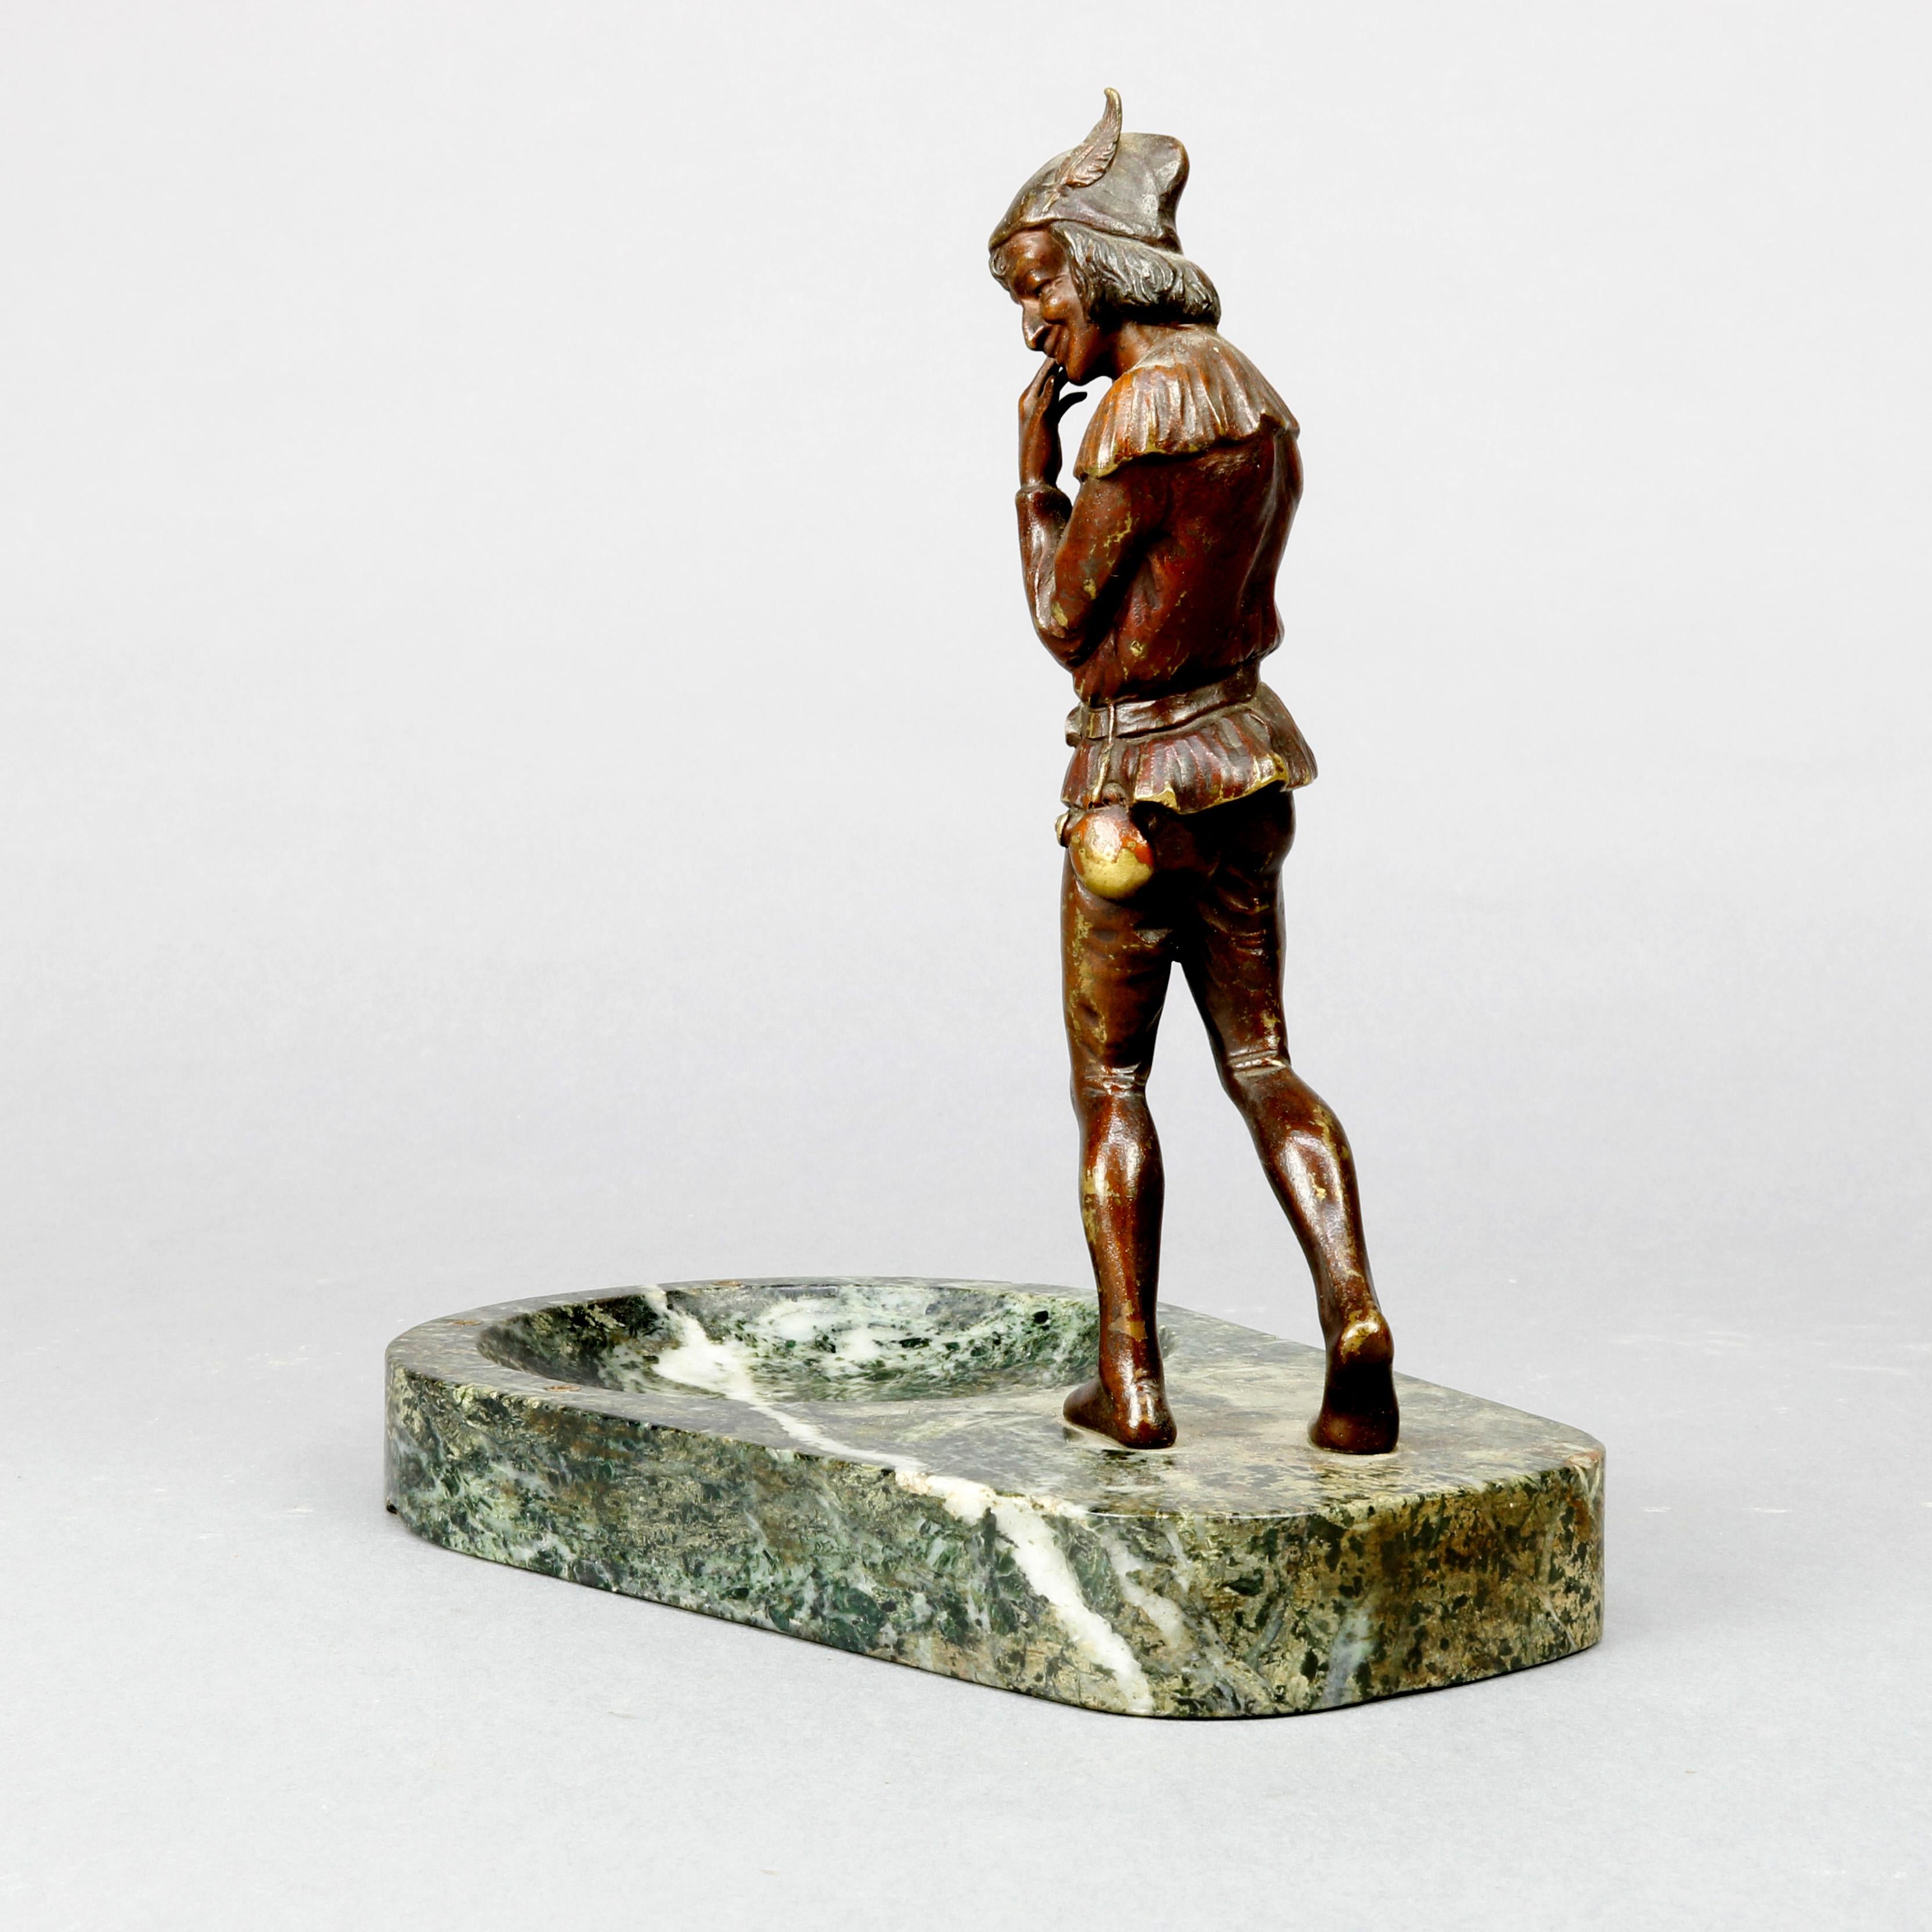 An antique figural cast bronze sculpture depicts young man in elf-like garb on marble base tray with bowl, circa 1890

Measures: 9